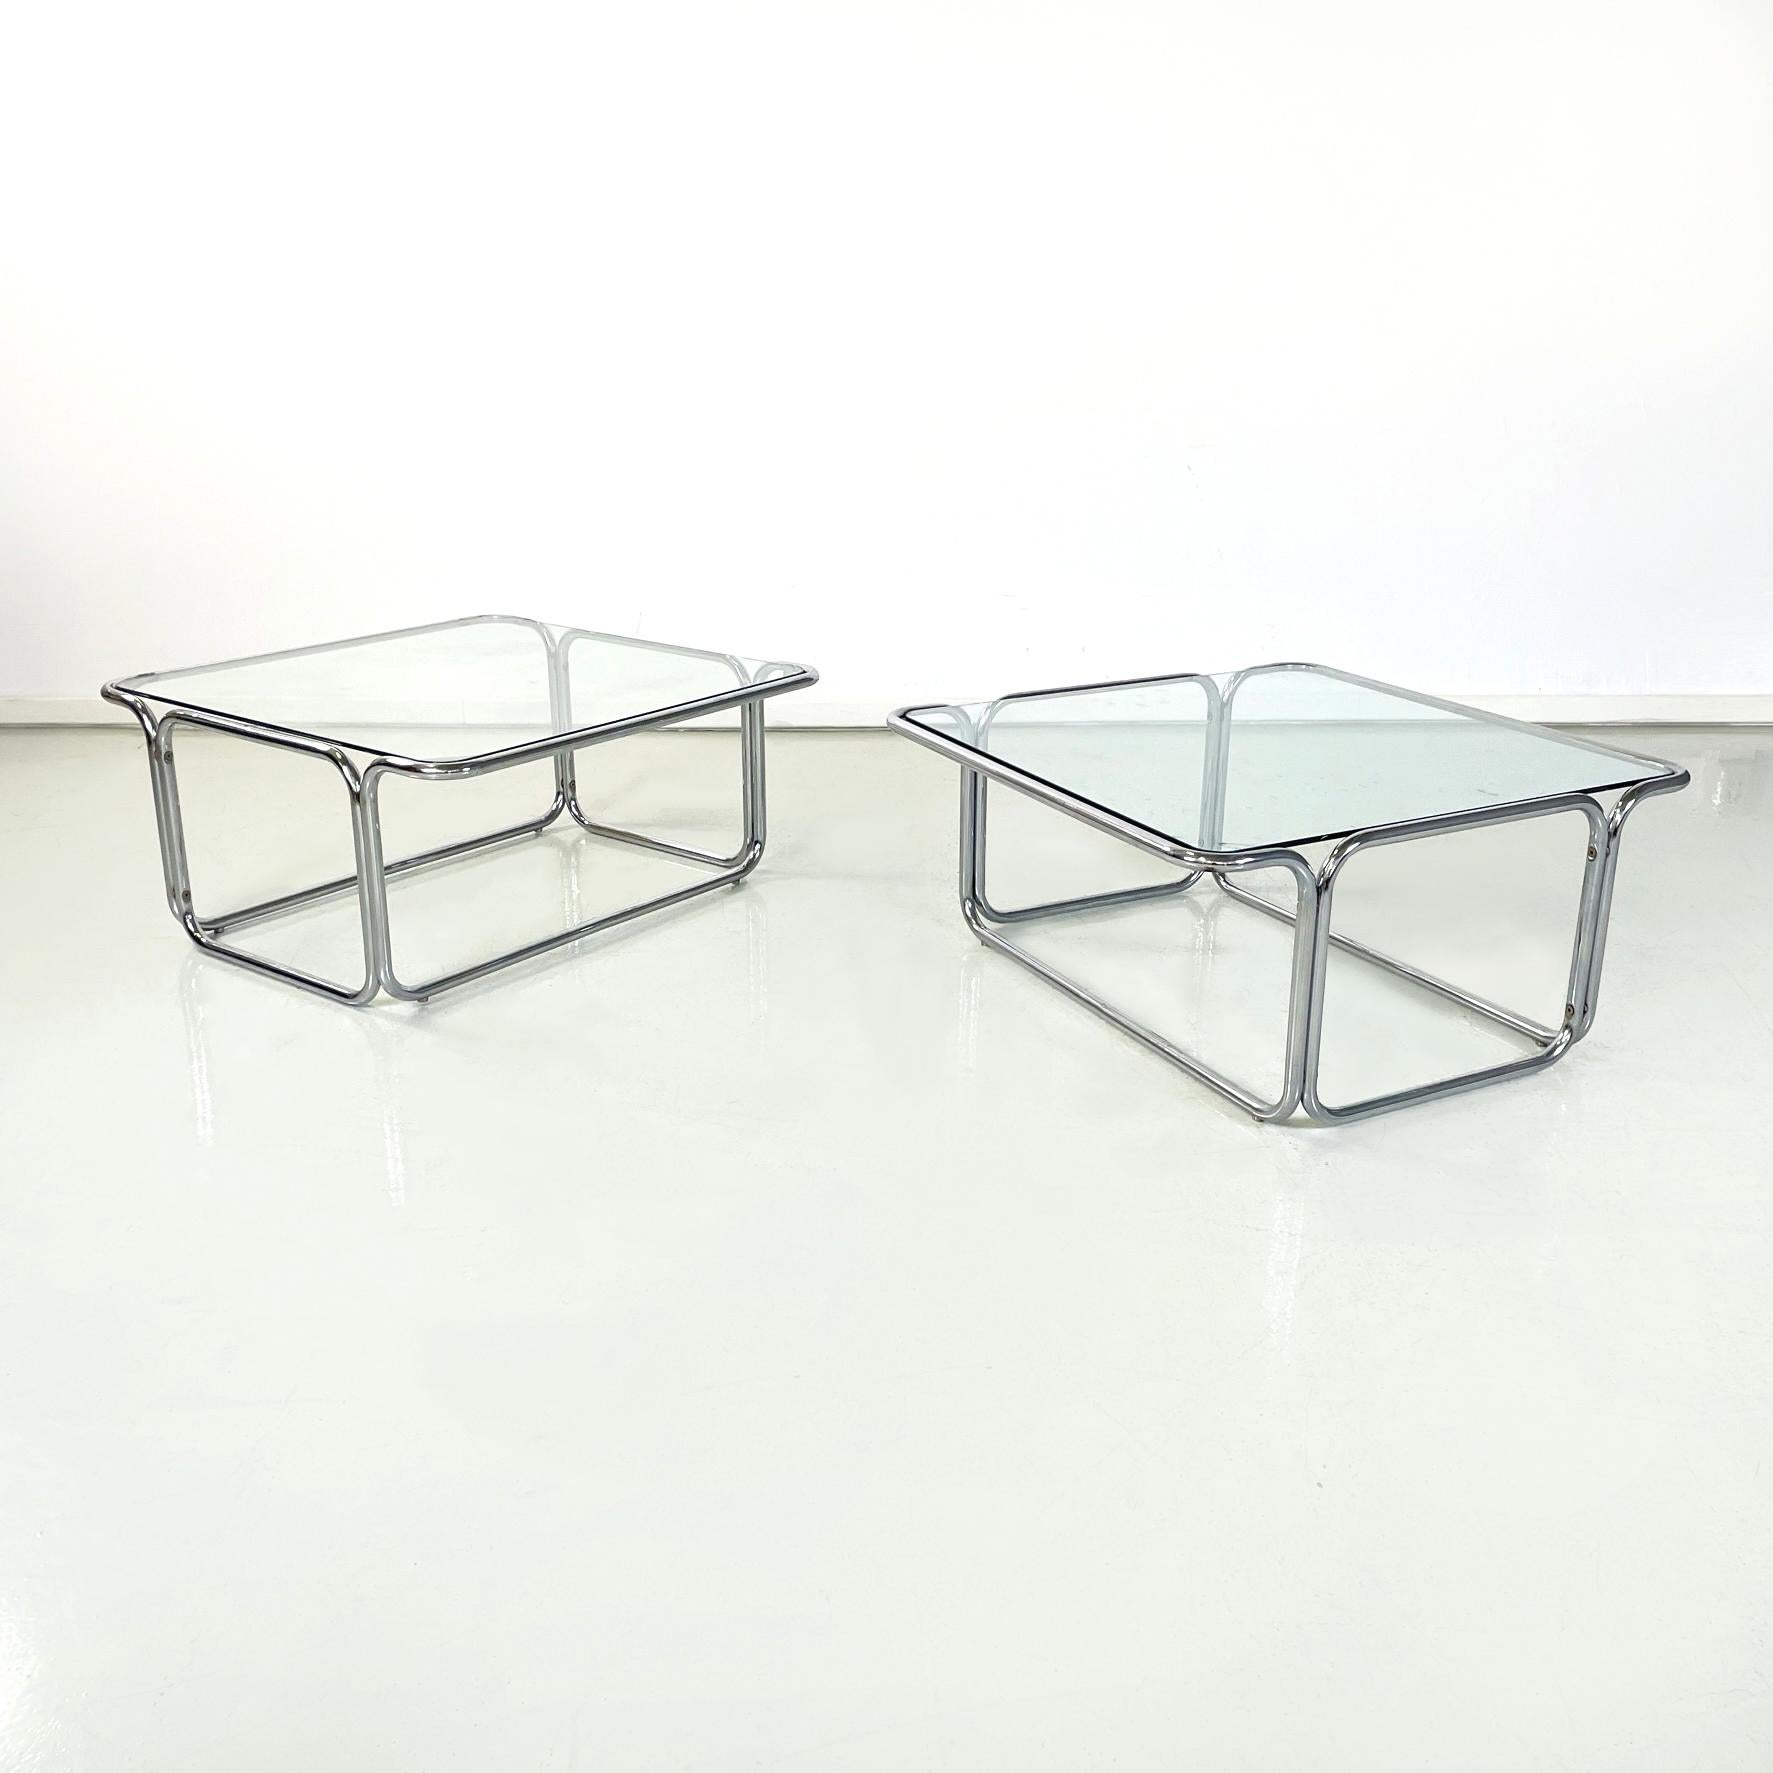 Italian modern Square Coffee tables in glass and chromed steel, 1970s
Pair of coffee tables with square glass top. The structure is entirely in tubular chromed steel. One of the two tables has an additional steel support on the corners. 1970s.
Good